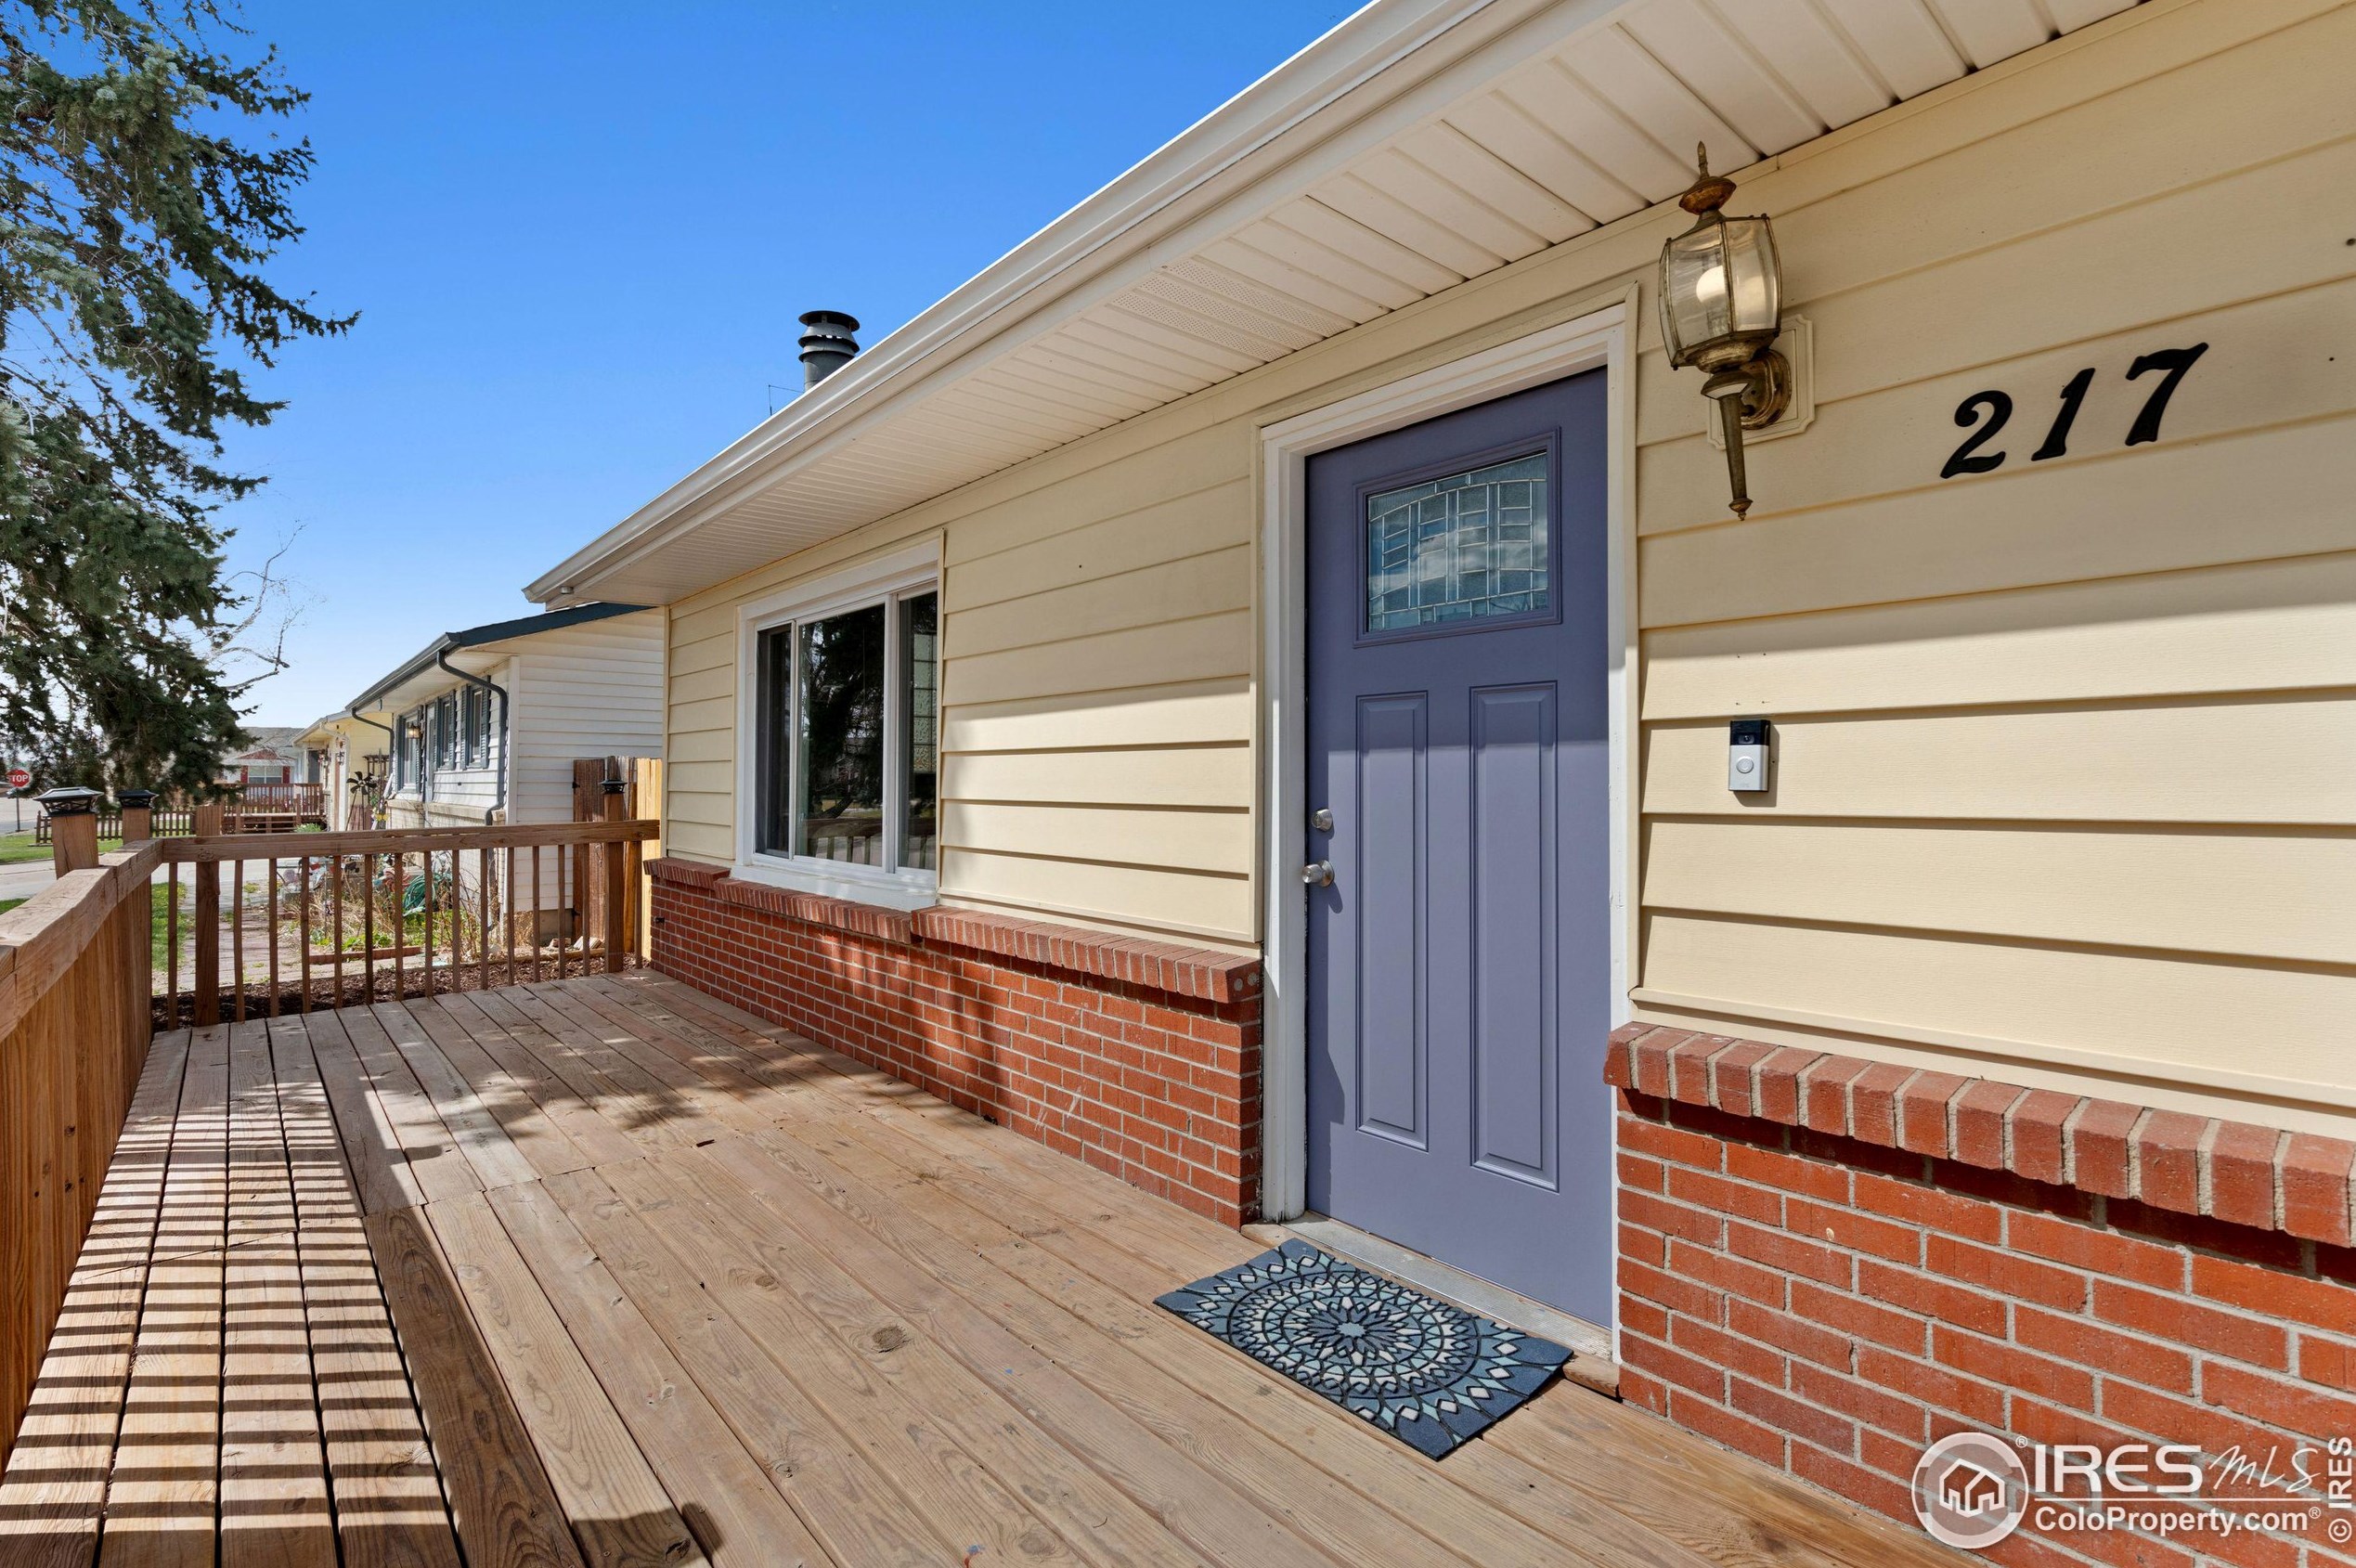 217 7th St, Kersey, CO 80644